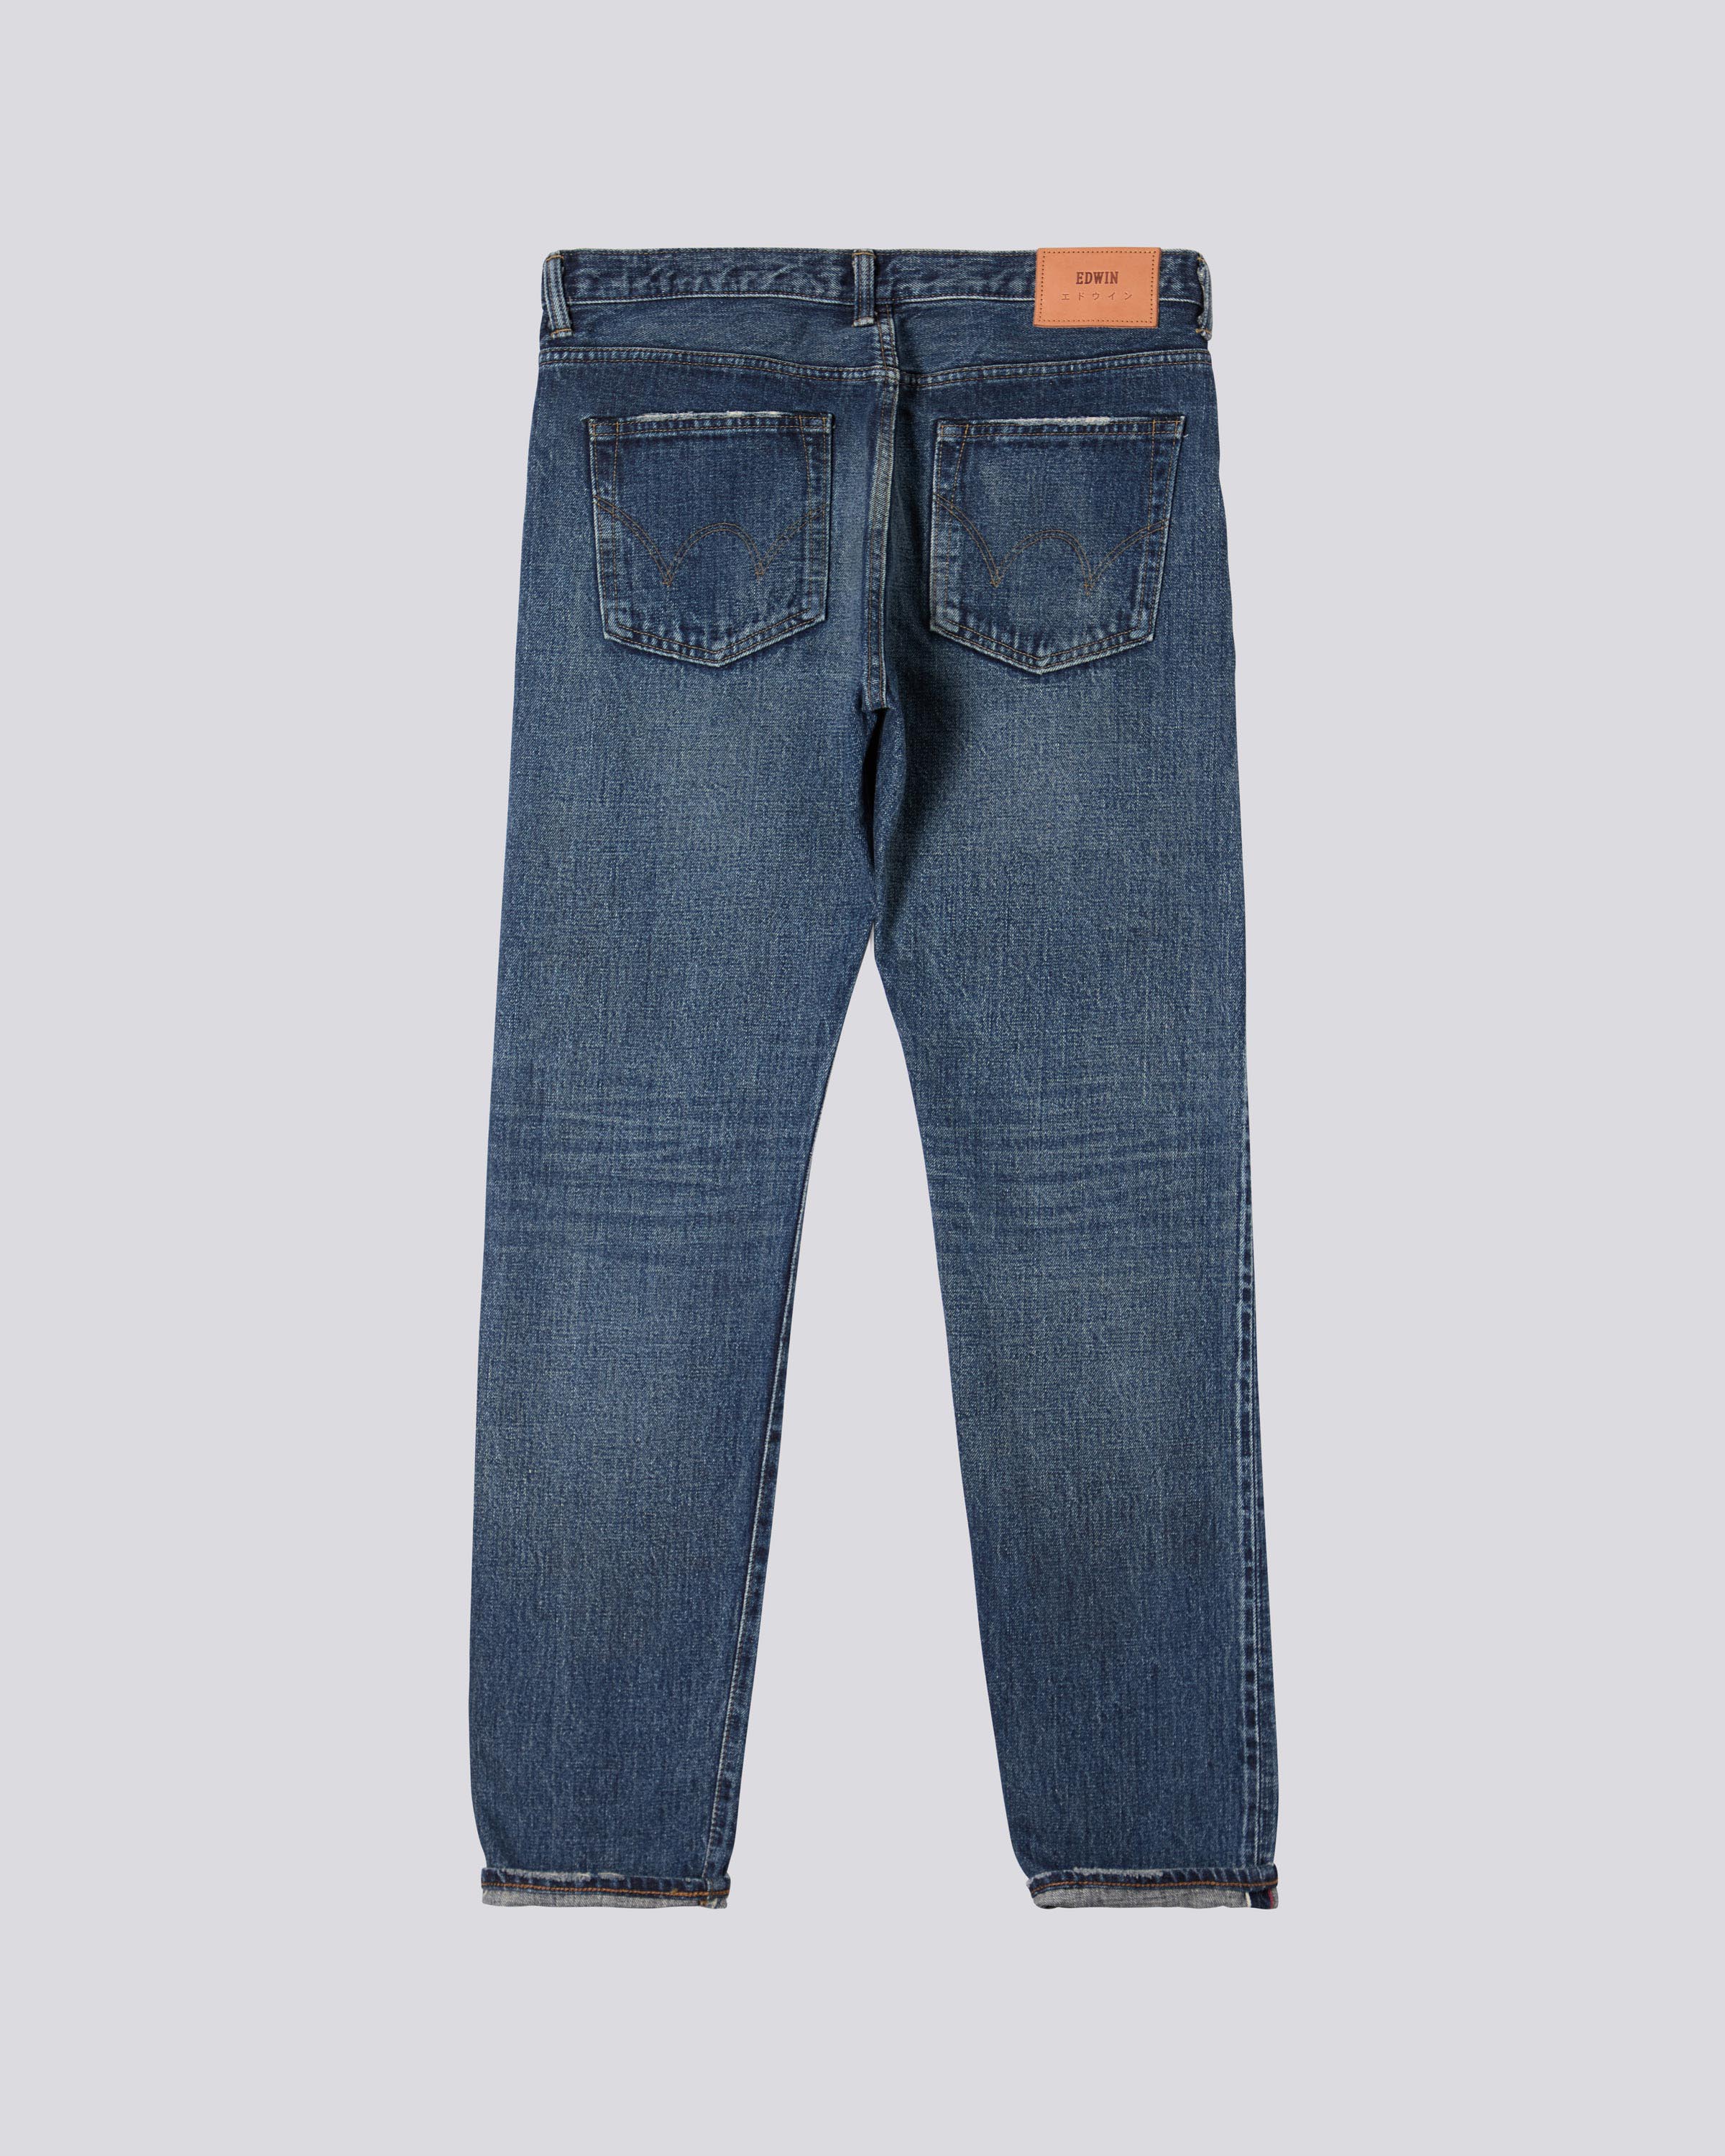 EDWIN Regular Tapered Jeans - Made in 